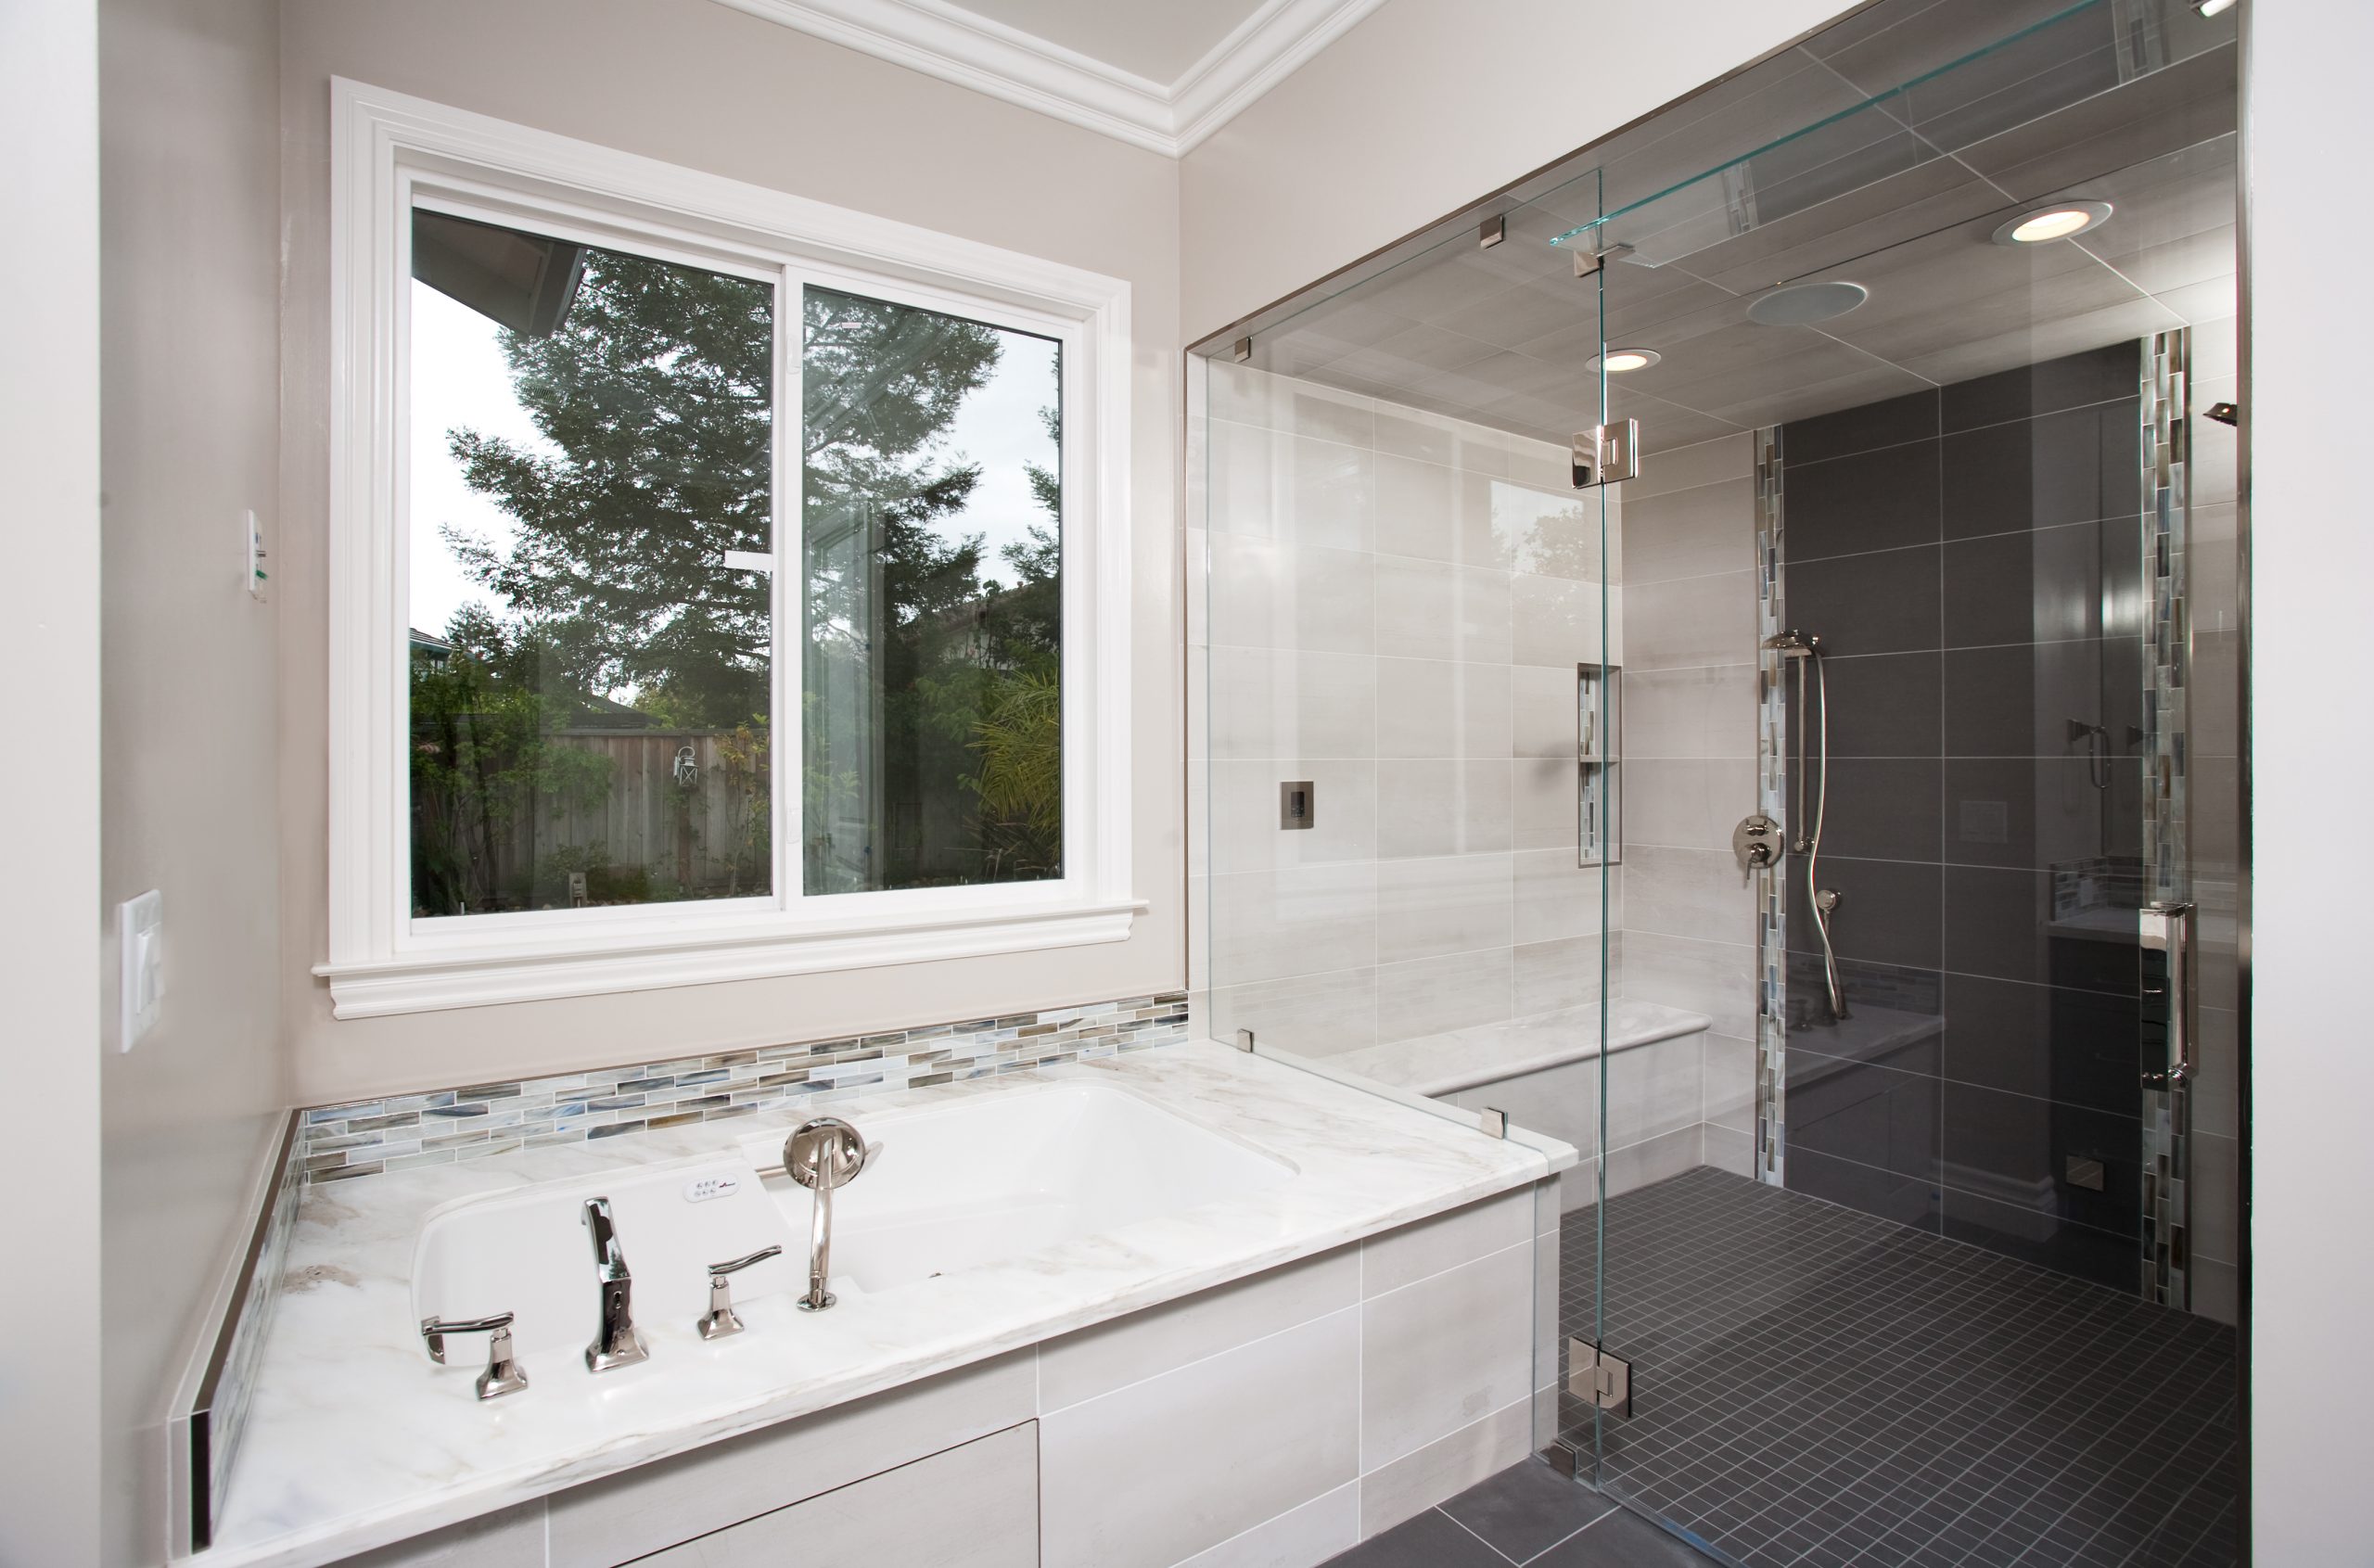 A master bathroom with Jacuzzi tub and large walk in glass shower.